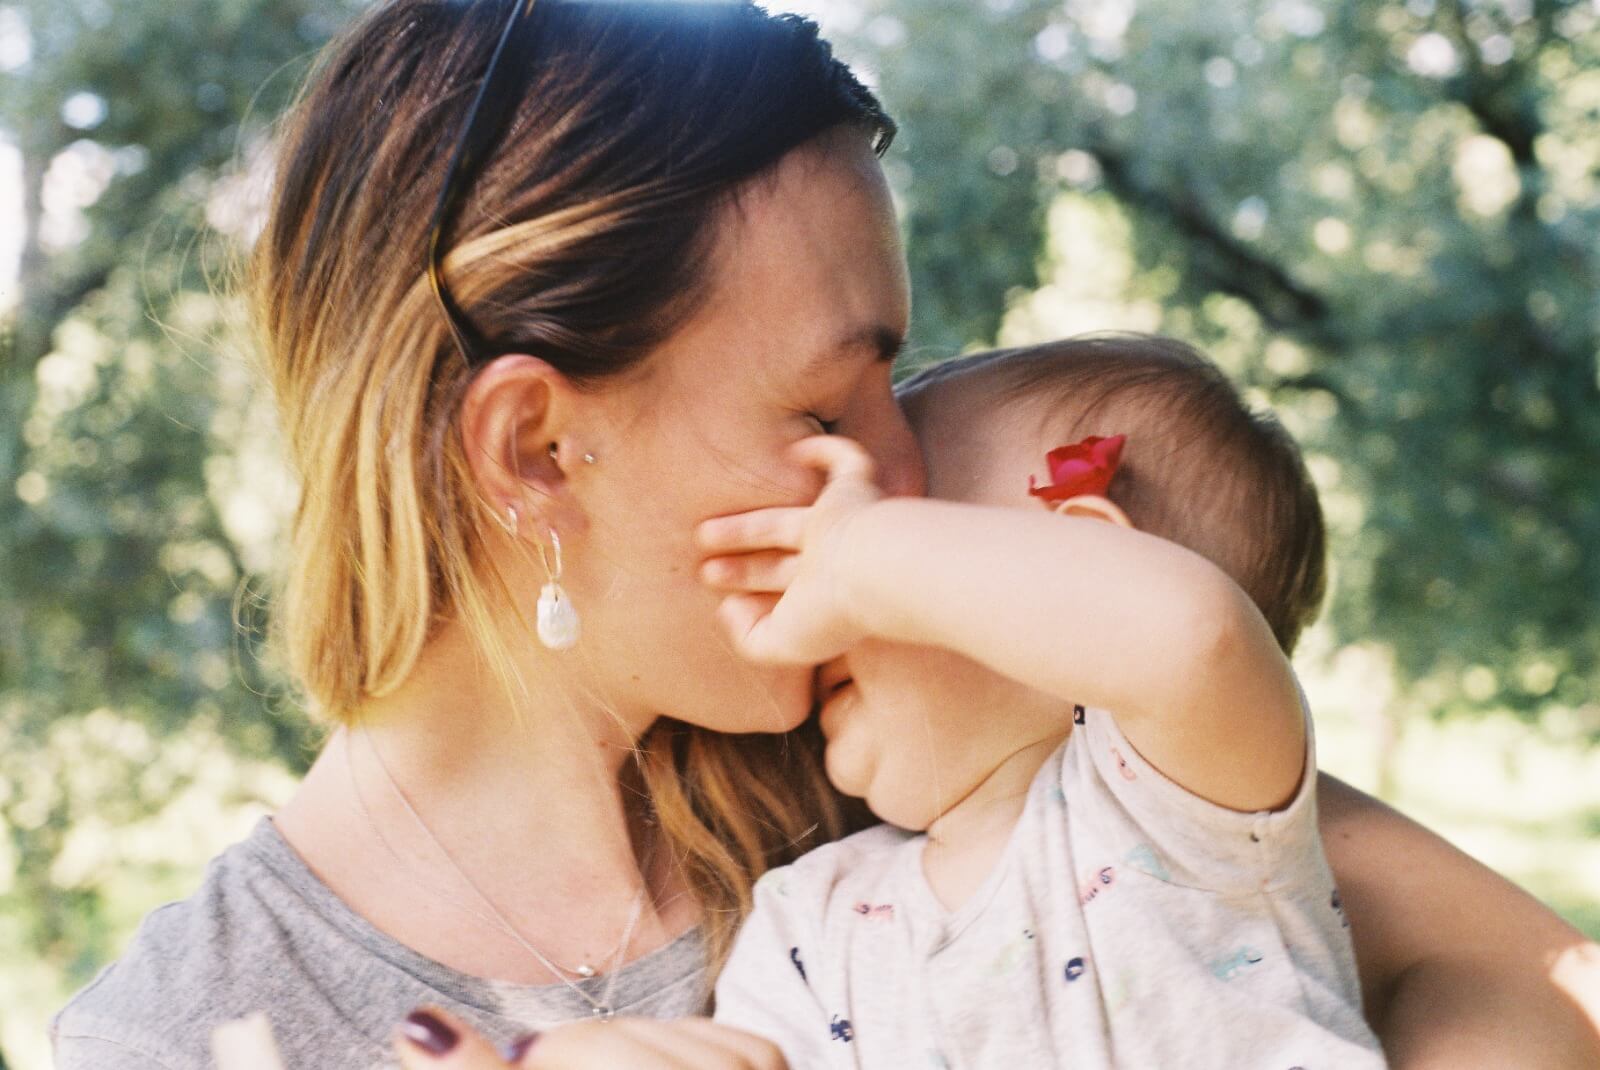 Lina is kissing her baby daughter on the forehead.